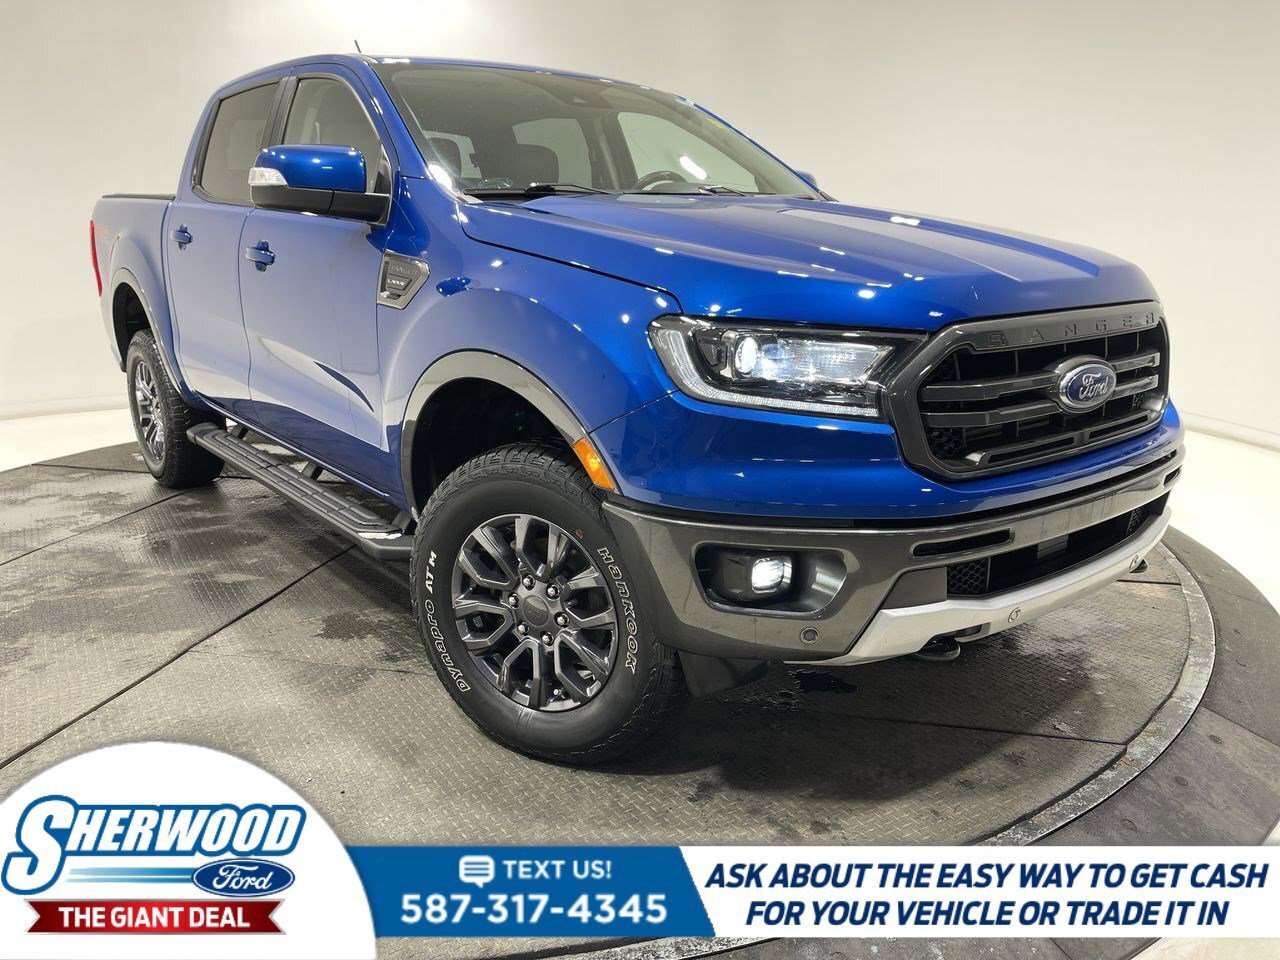 2019 Ford Ranger Lariat- $0 Down $173 Weekly- TECH & TOW PKGS